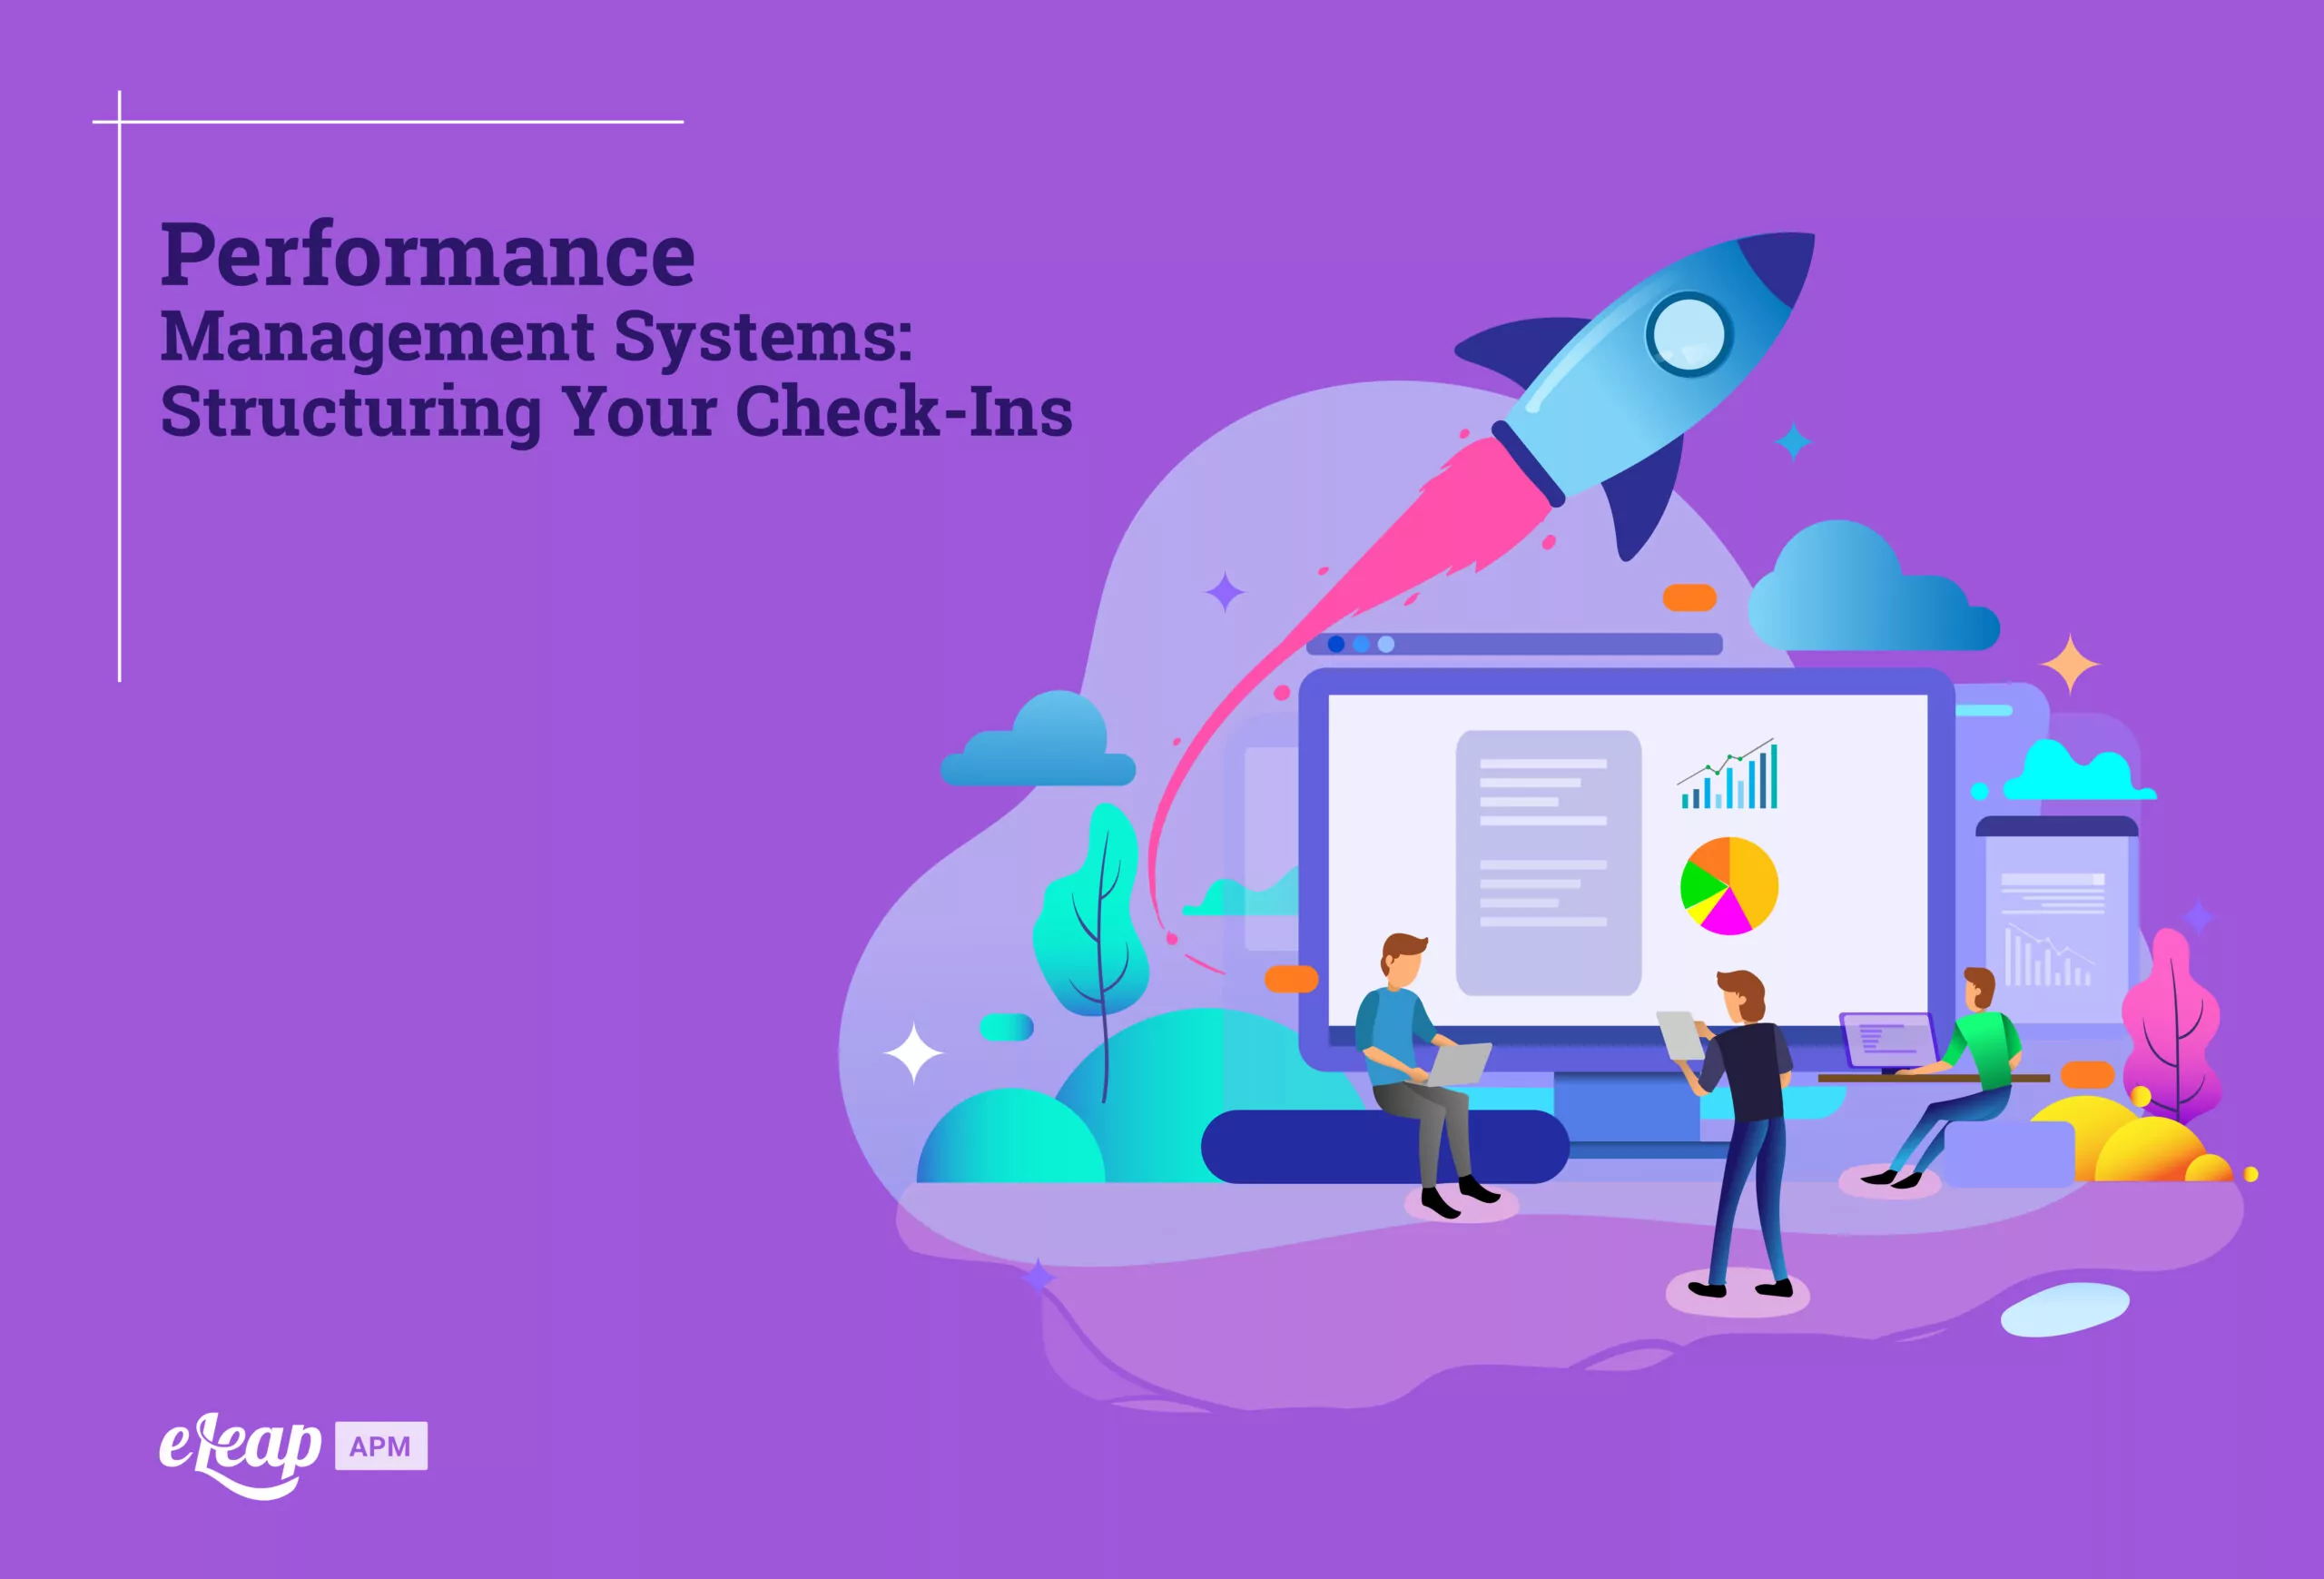 Performance Management Systems: Structuring Your Check-Ins